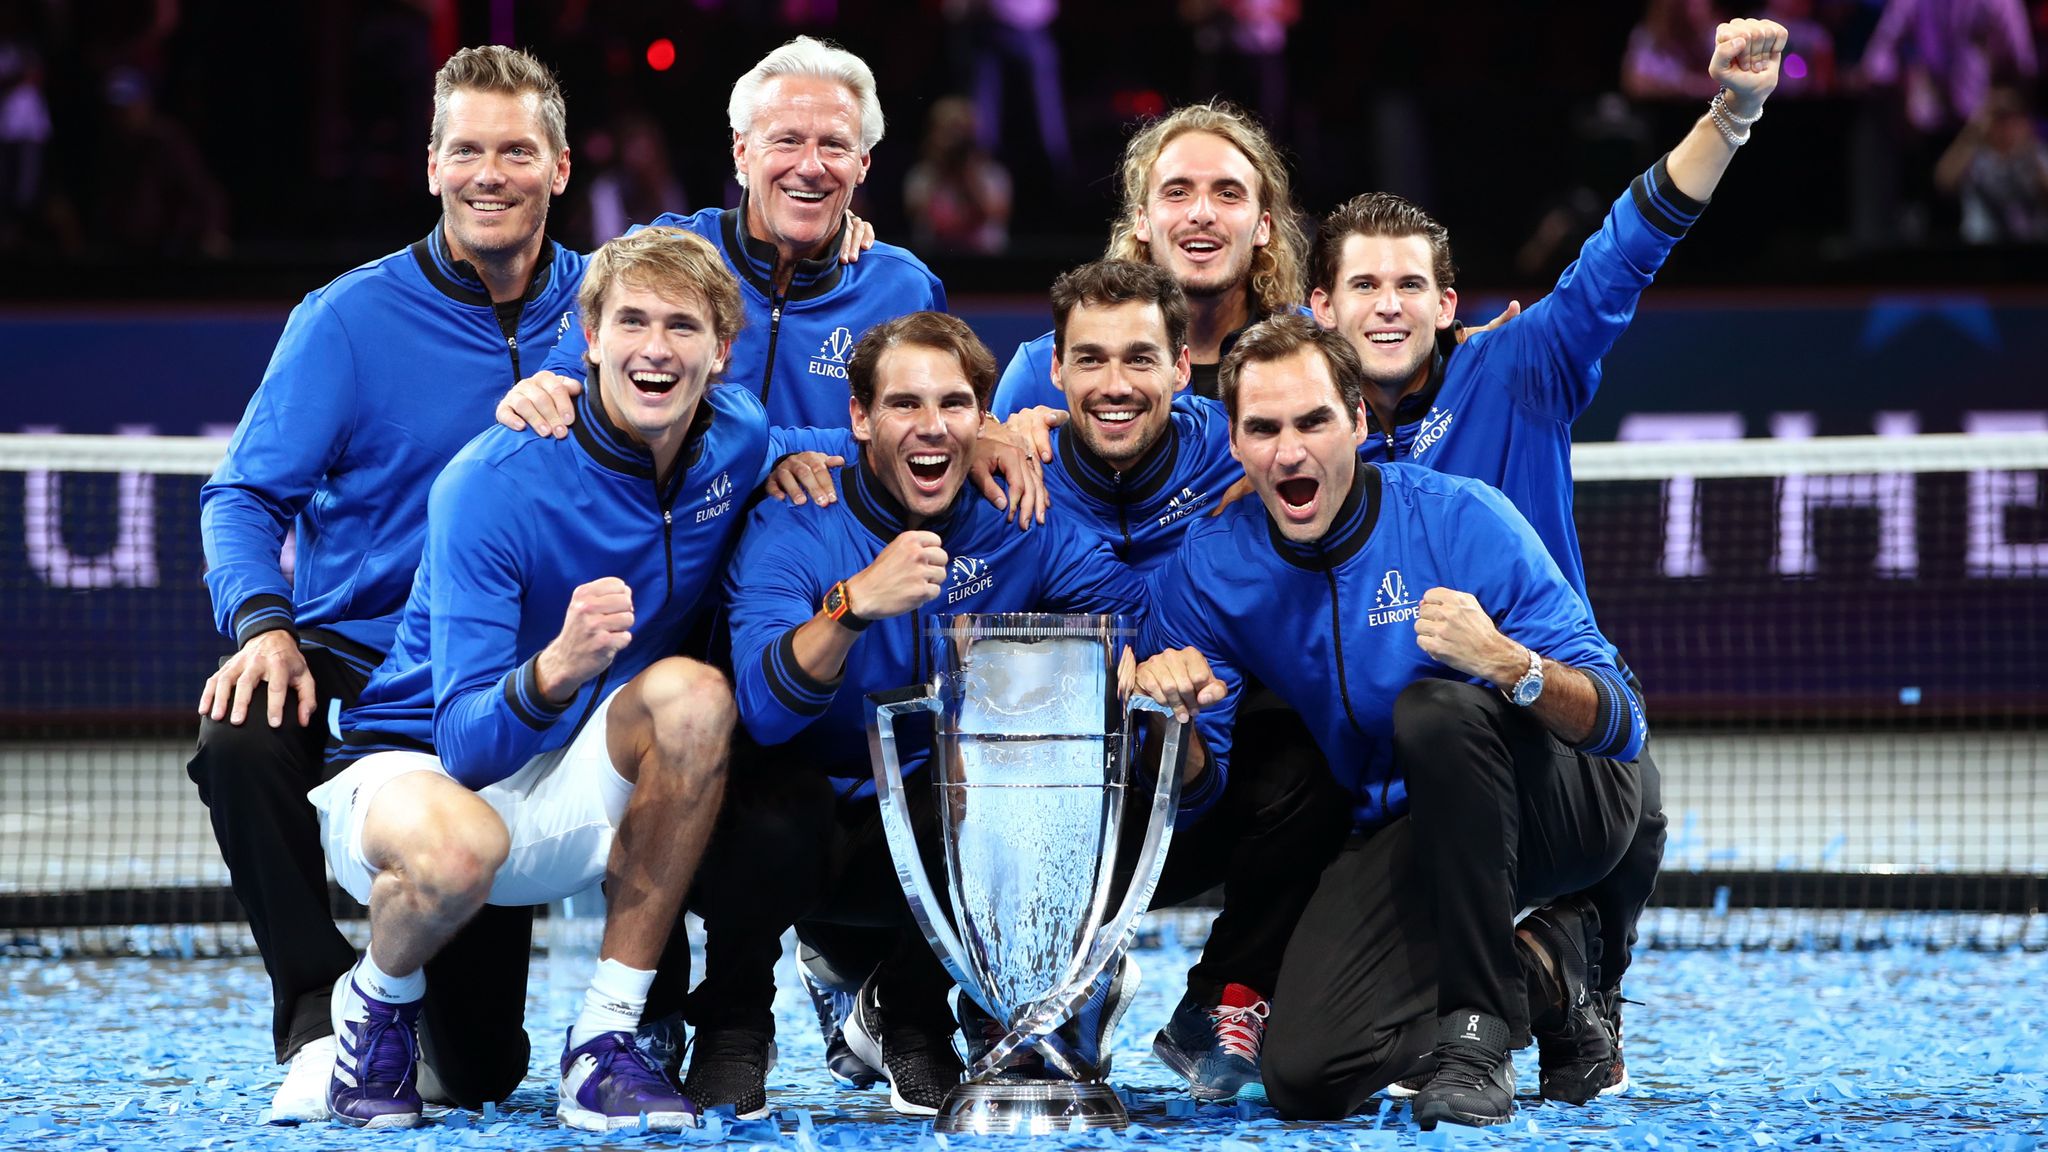 Laver Cup Alexander Zverev and Roger Federer see Europe rally for win Tennis News Sky Sports